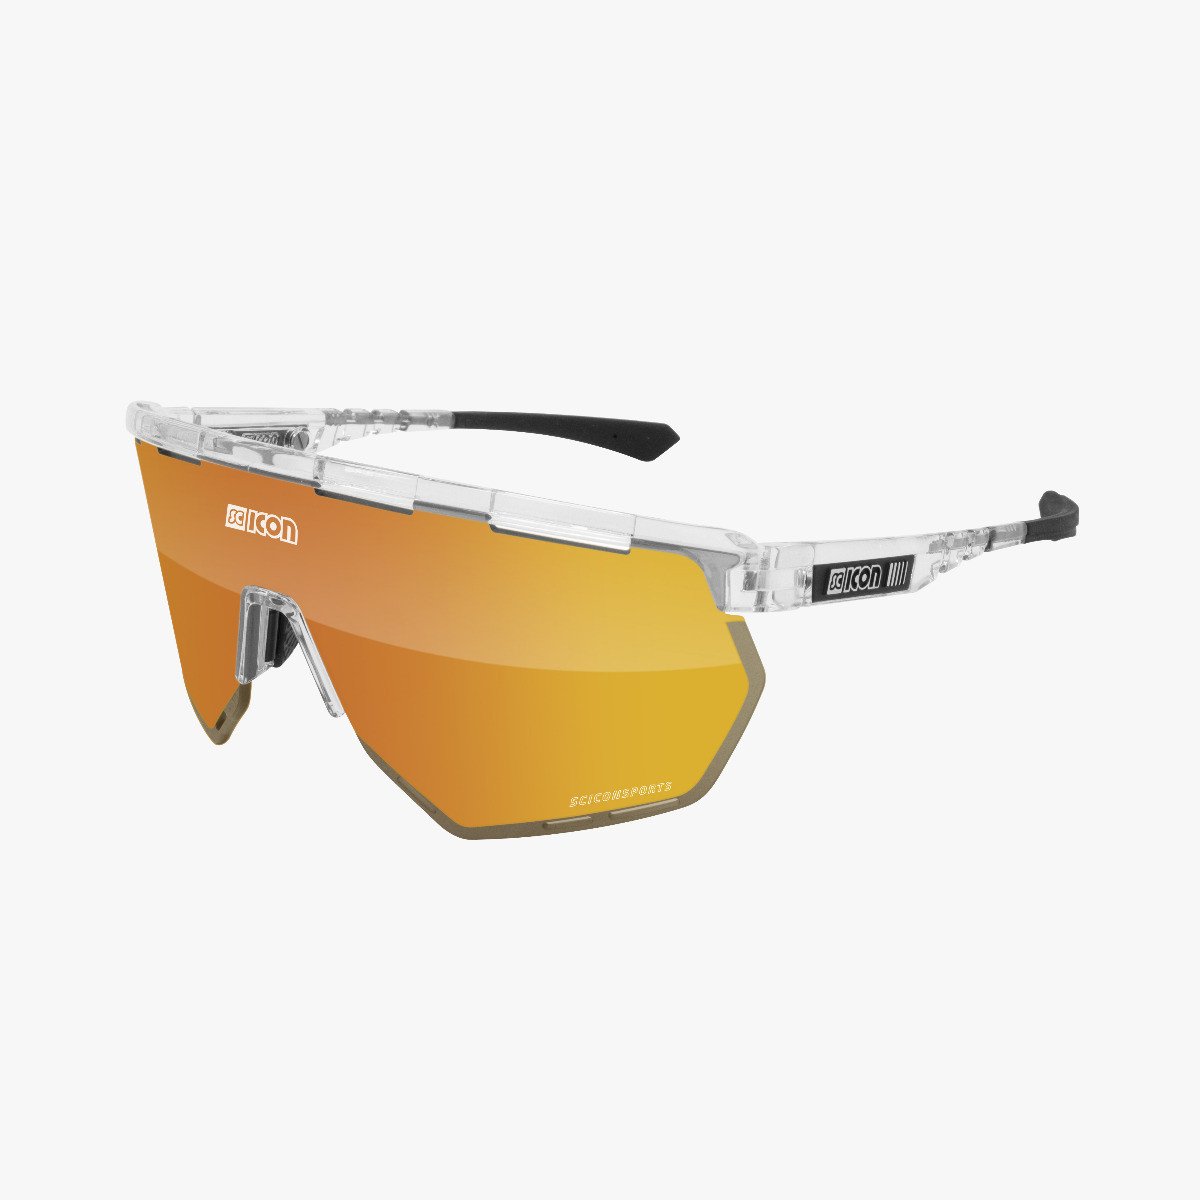 Scicon Sports | Aerowing Sport Performance Sunglasses - Crystal Gloss / Multimirror Bronze - EY26070701